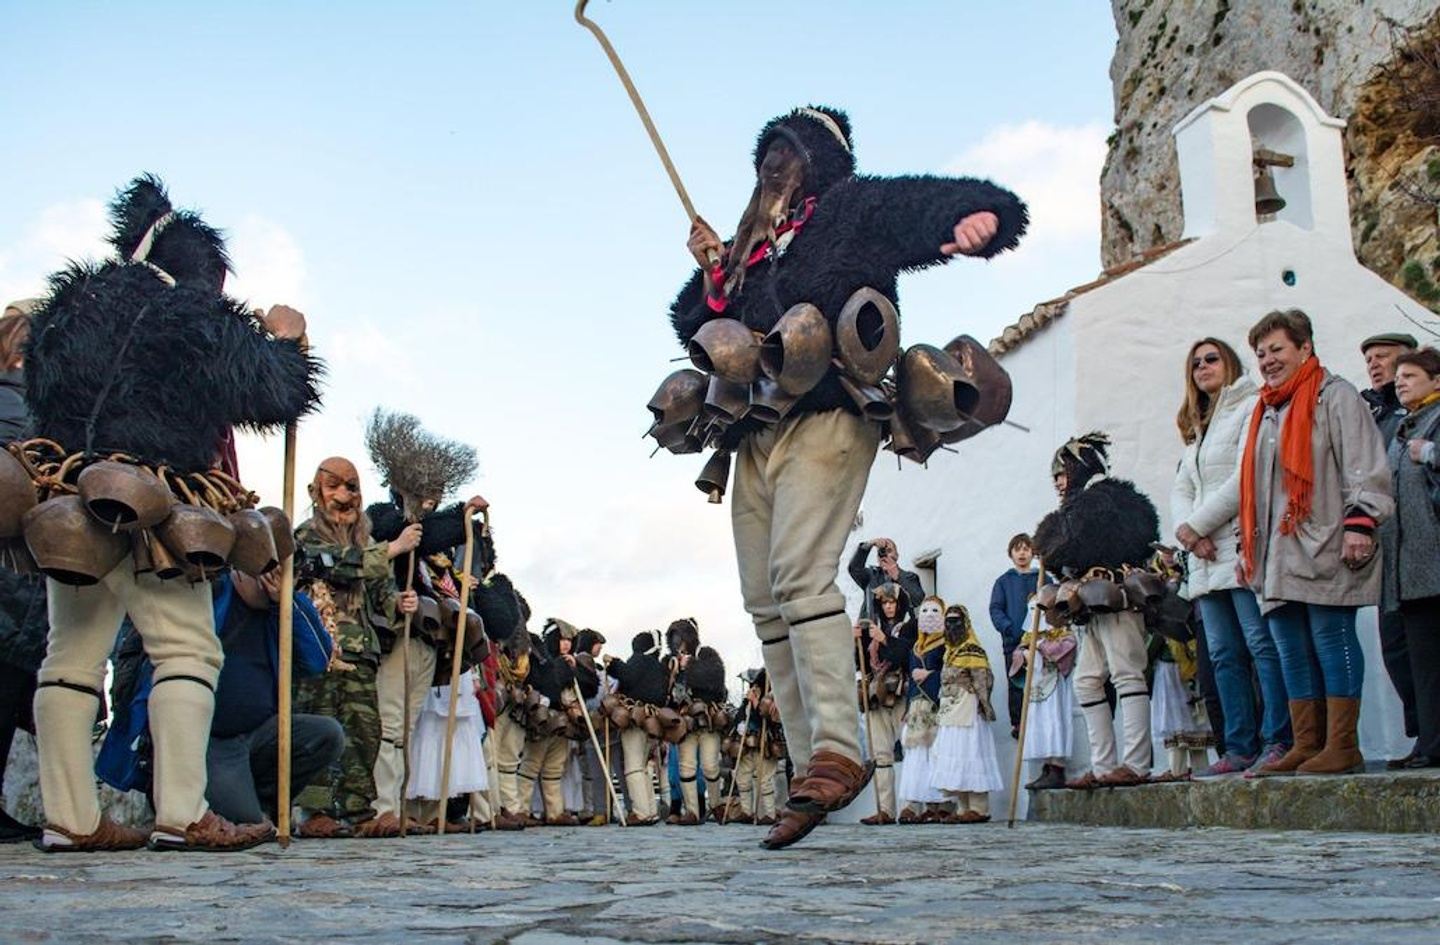 Skyros Apokries Experience - tradition and dance!